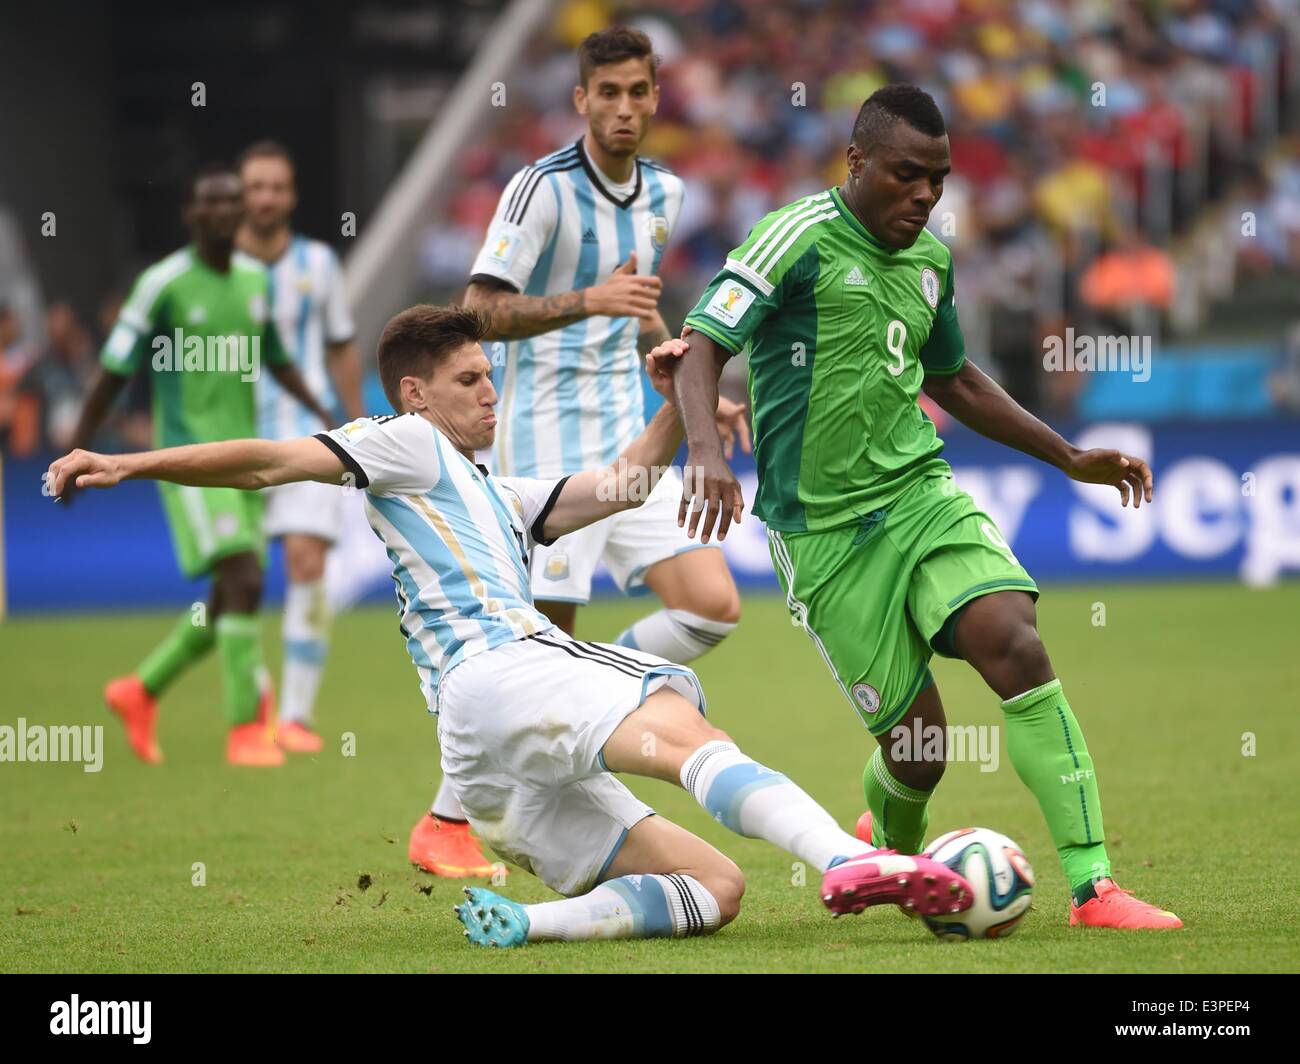 Porto Alegre, Brazil. 25th June, 2014. Argentina's Federico Fernandez (L, front) vies with Nigeria's Emmanuel Emenike during a Group F match between Nigeria and Argentina of 2014 FIFA World Cup at the Estadio Beira-Rio Stadium in Porto Alegre, Brazil, on June 25, 2014. © Li Ga/Xinhua/Alamy Live News Stock Photo